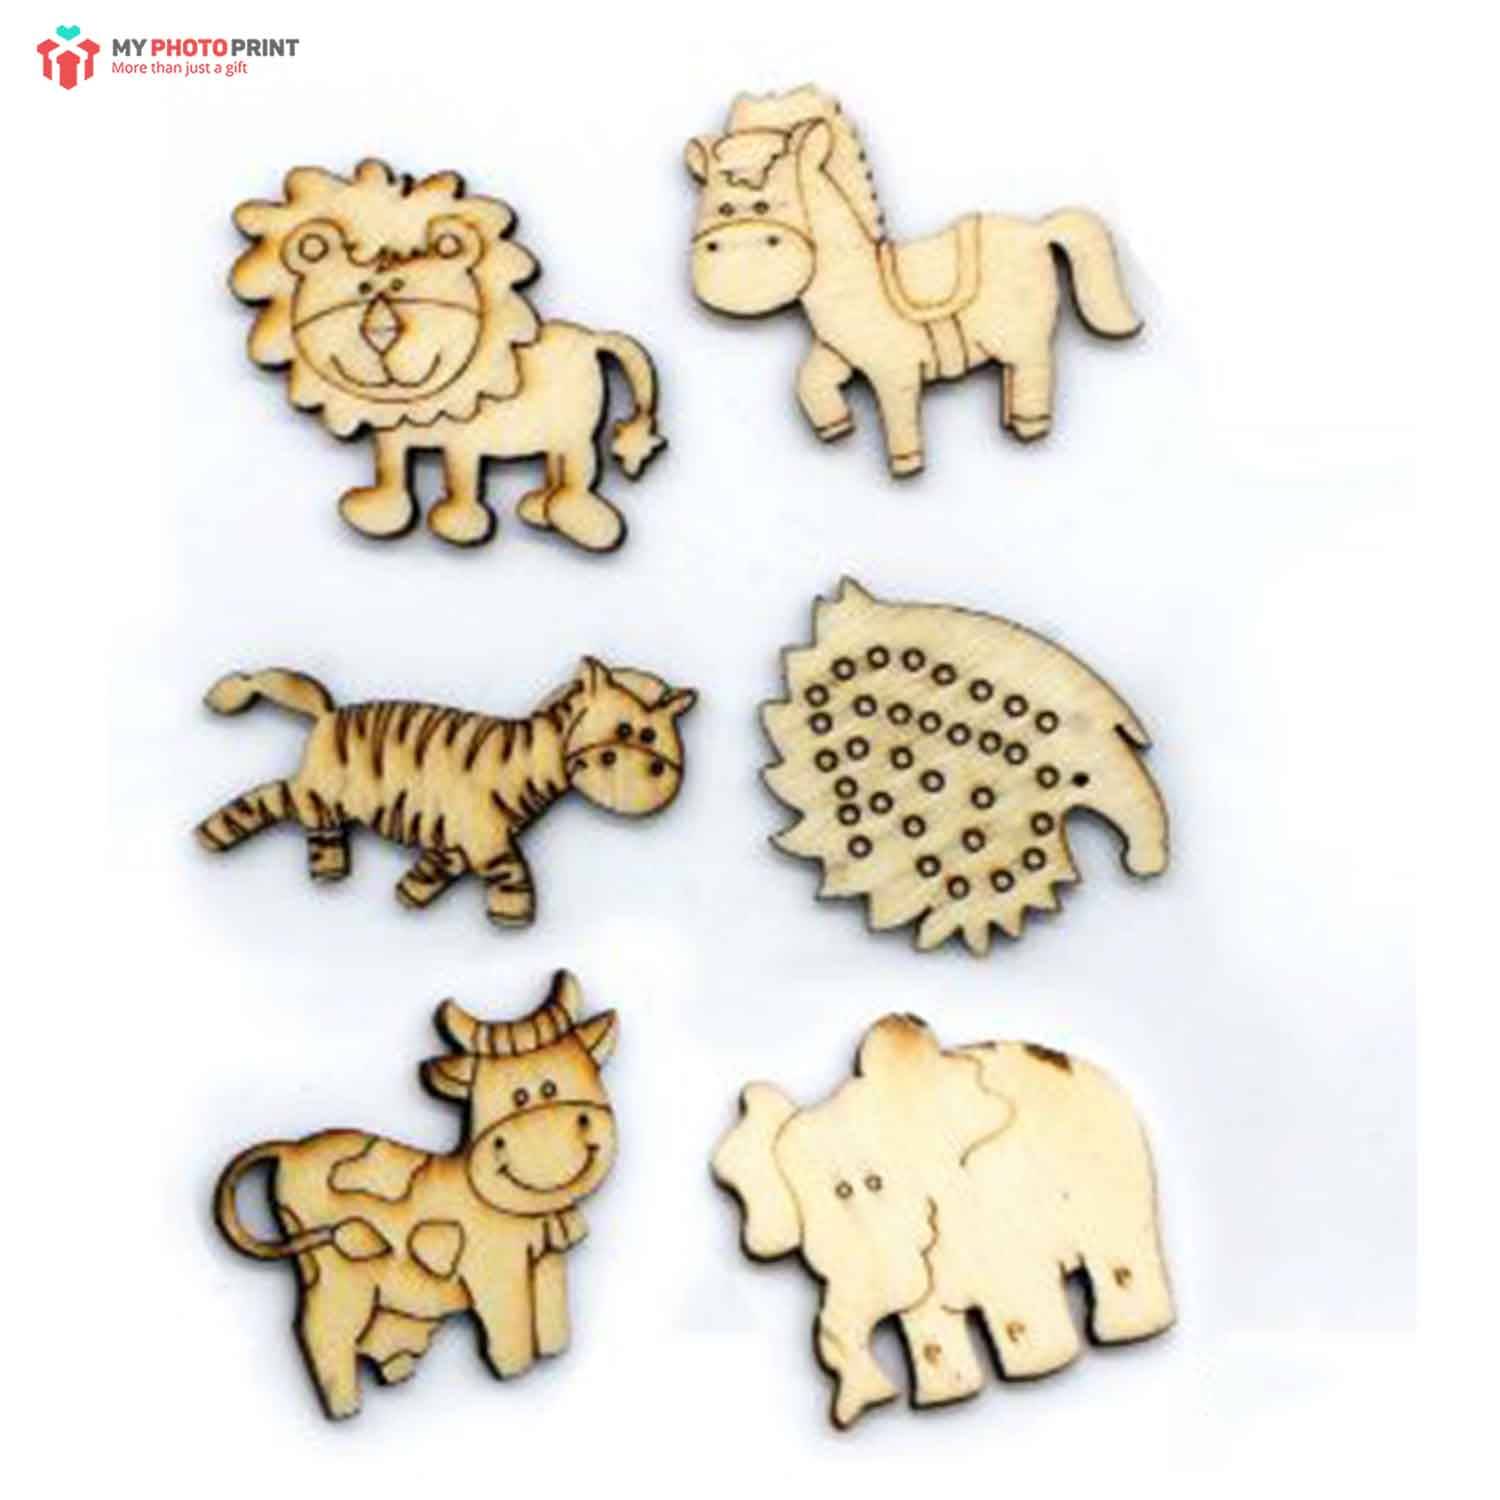  Animals Design MDF Wooden Craft Cutout Any Shapes & Patterns | (Pack Of 6pcs)